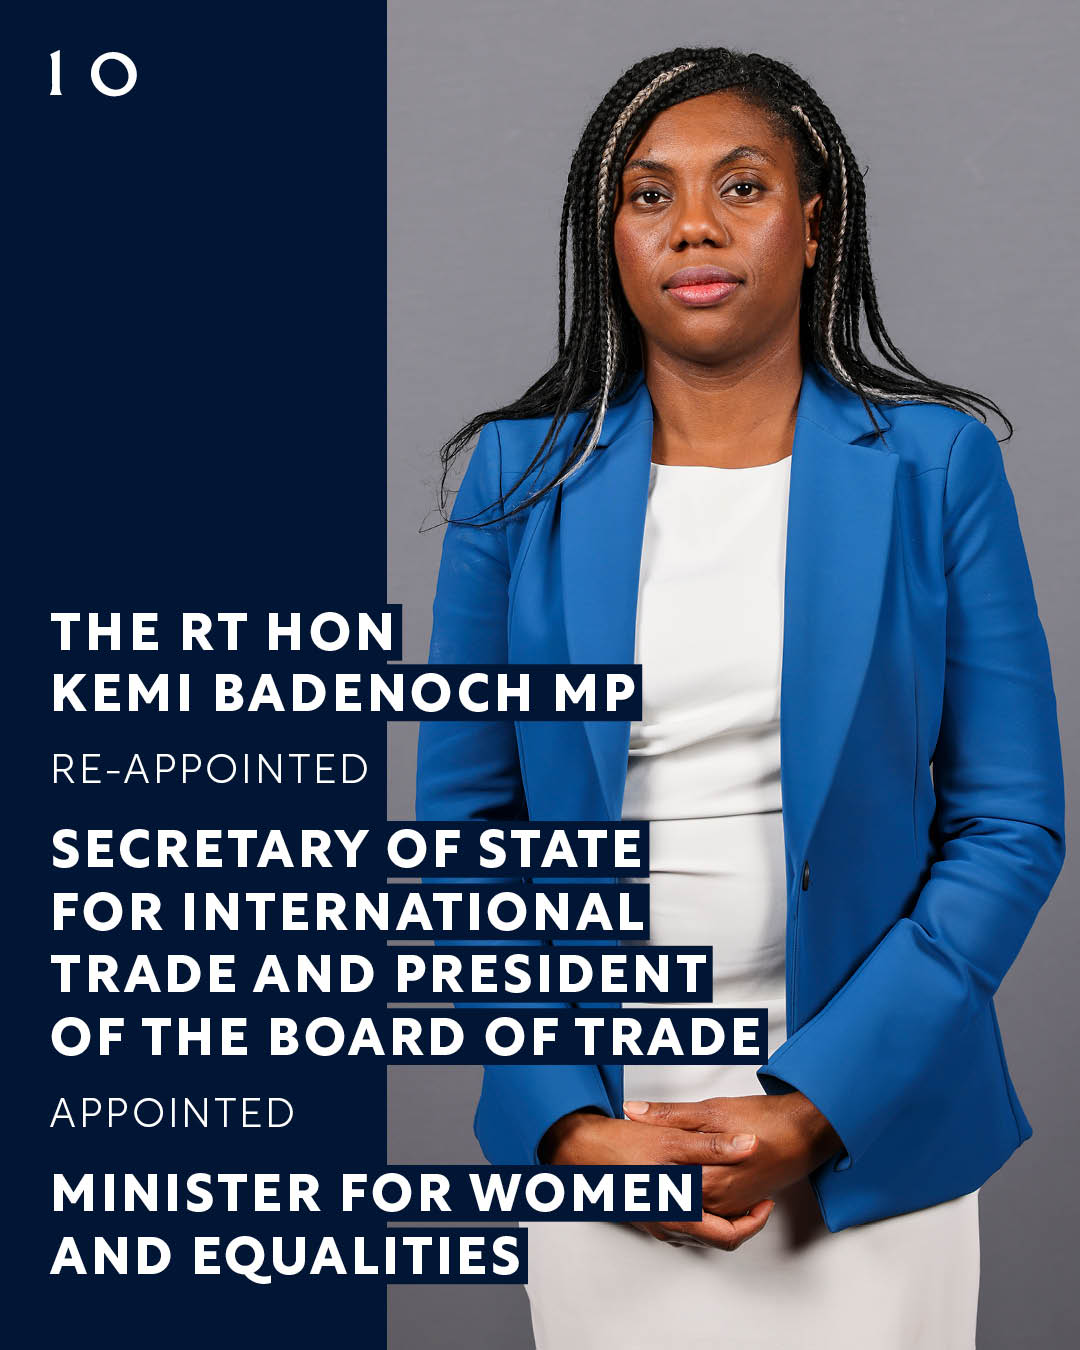 The Rt Hon Kemi Badenoch MP re-appointed Secretary of State for International Trade and President of the Board of Trade. Appointed Minister for Women and Equalities